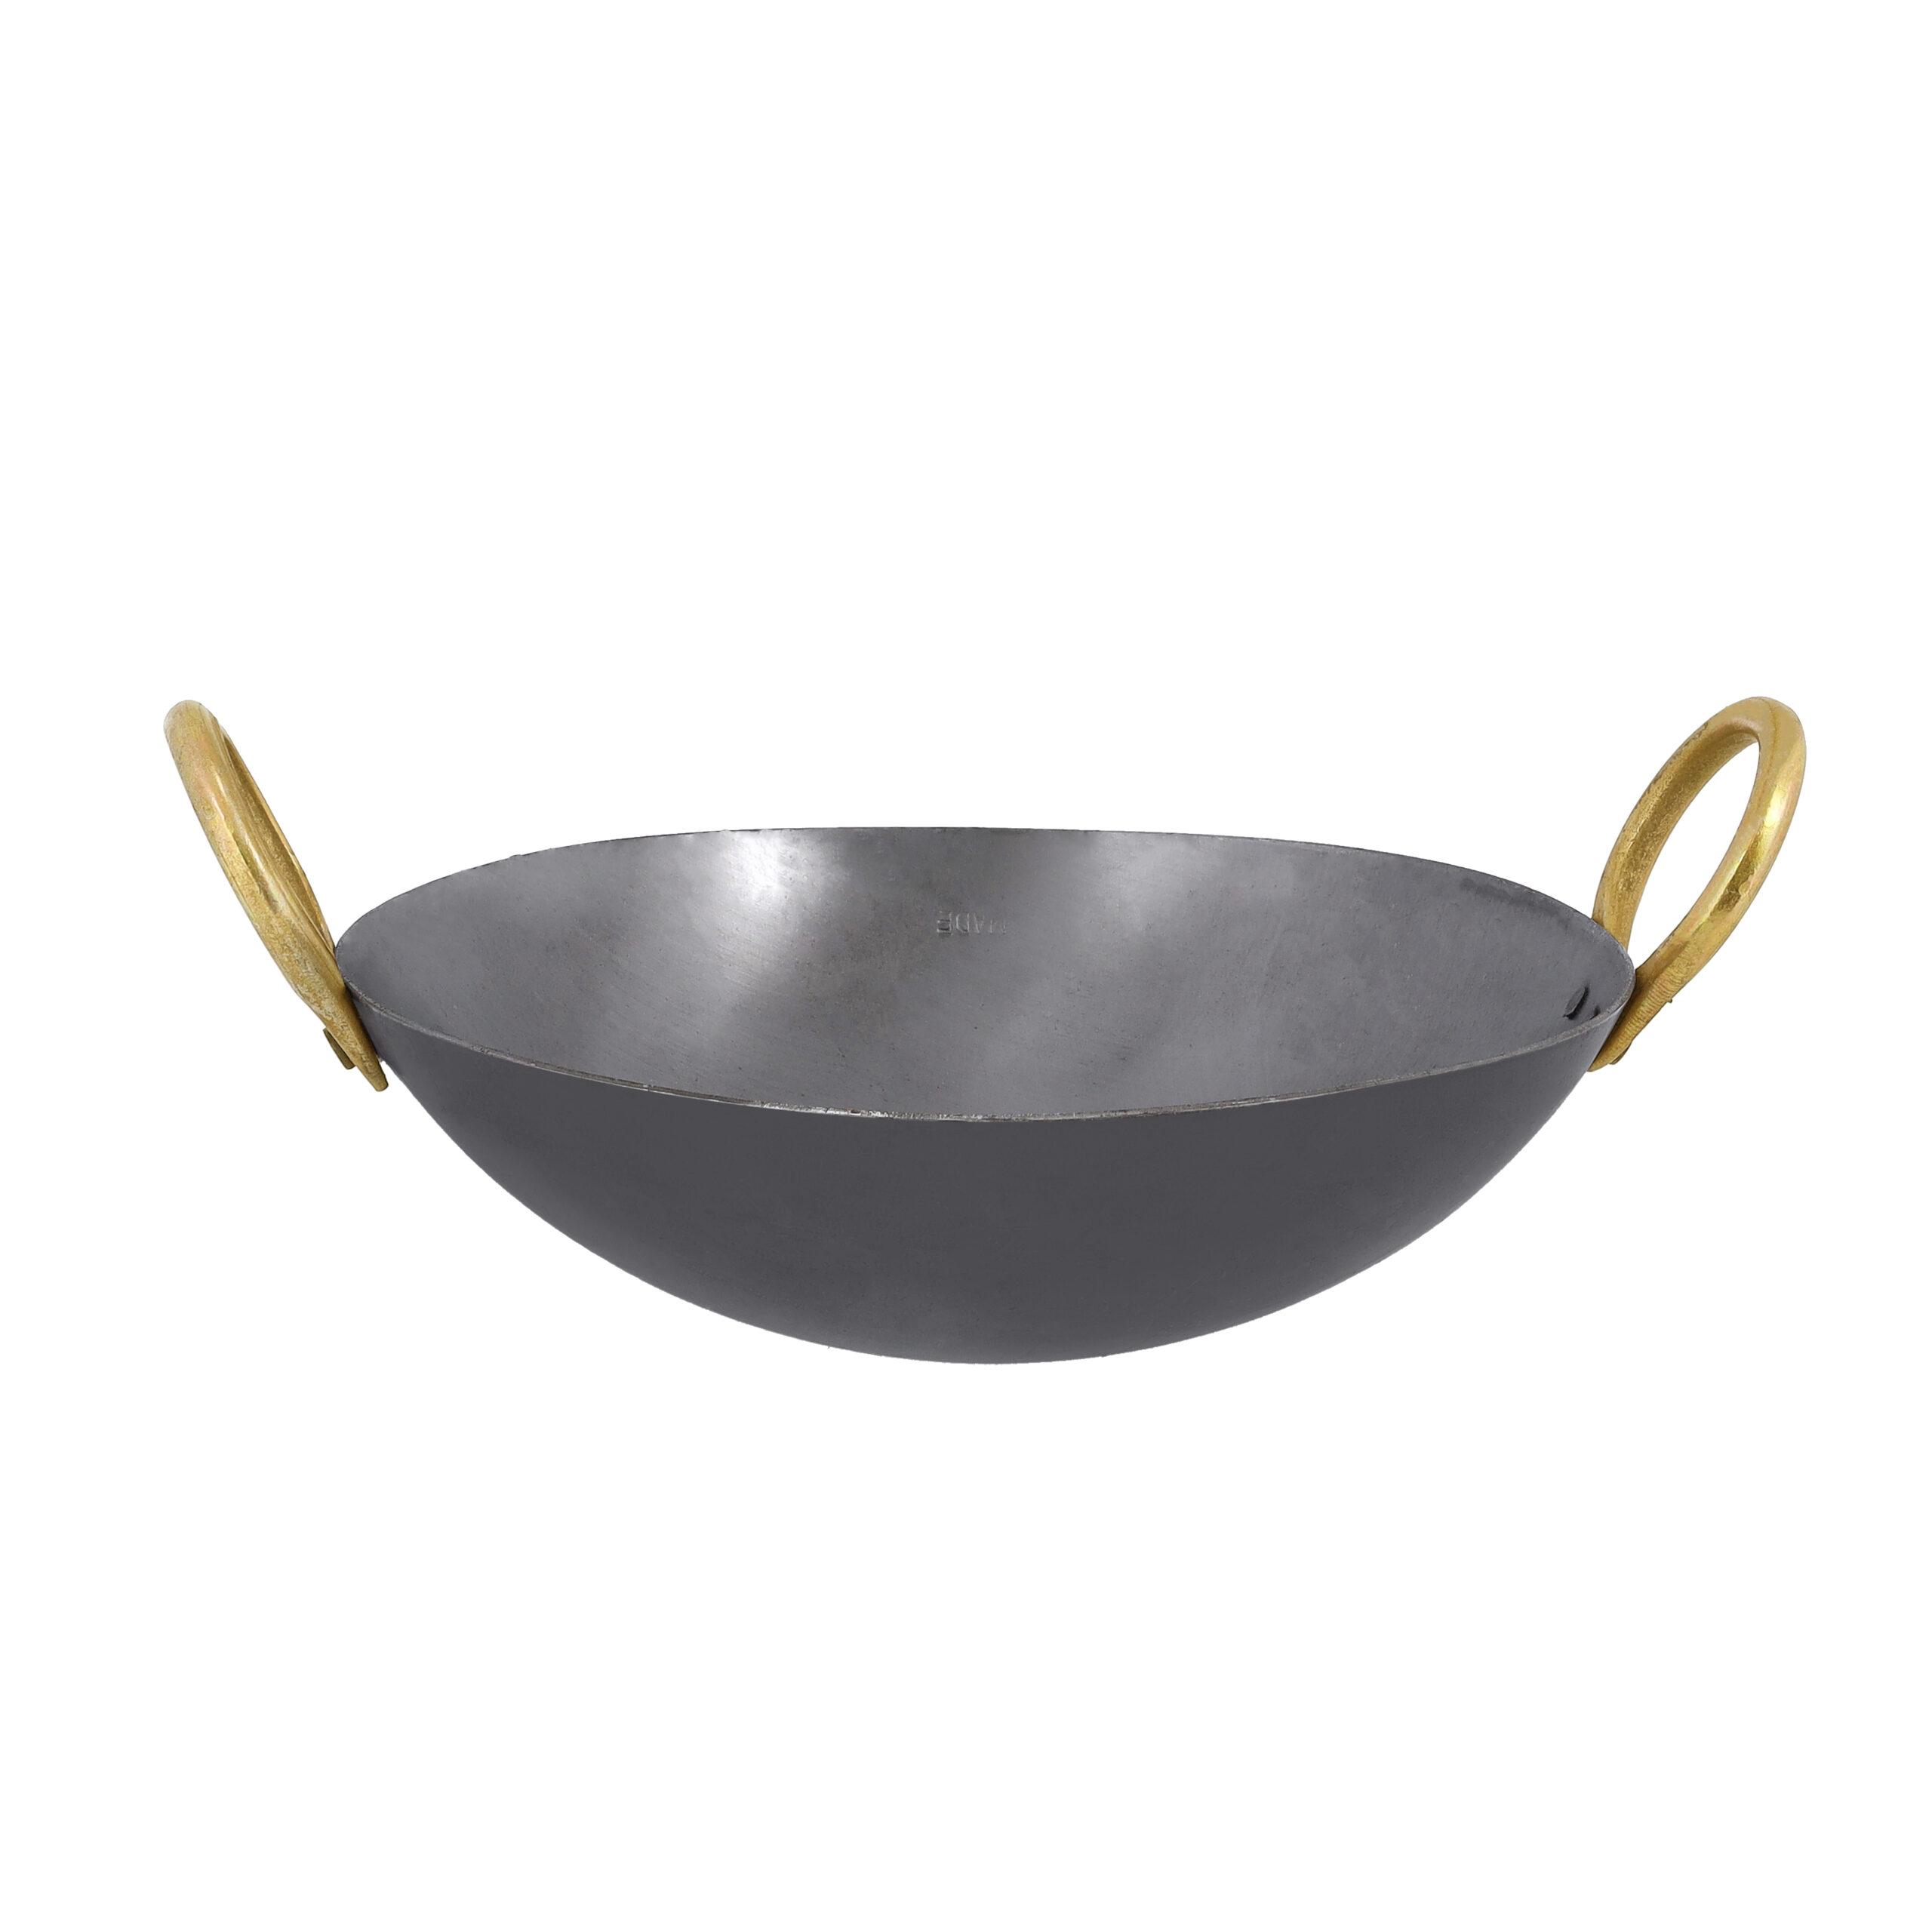 Delcasa Iron Kadai with Deep Round Bottom and Strong Handle, DC1990 | Traditional 25cm Deep Frying Kadai | Ideal for Home Cooking, Restaurant Kitchen and Catering